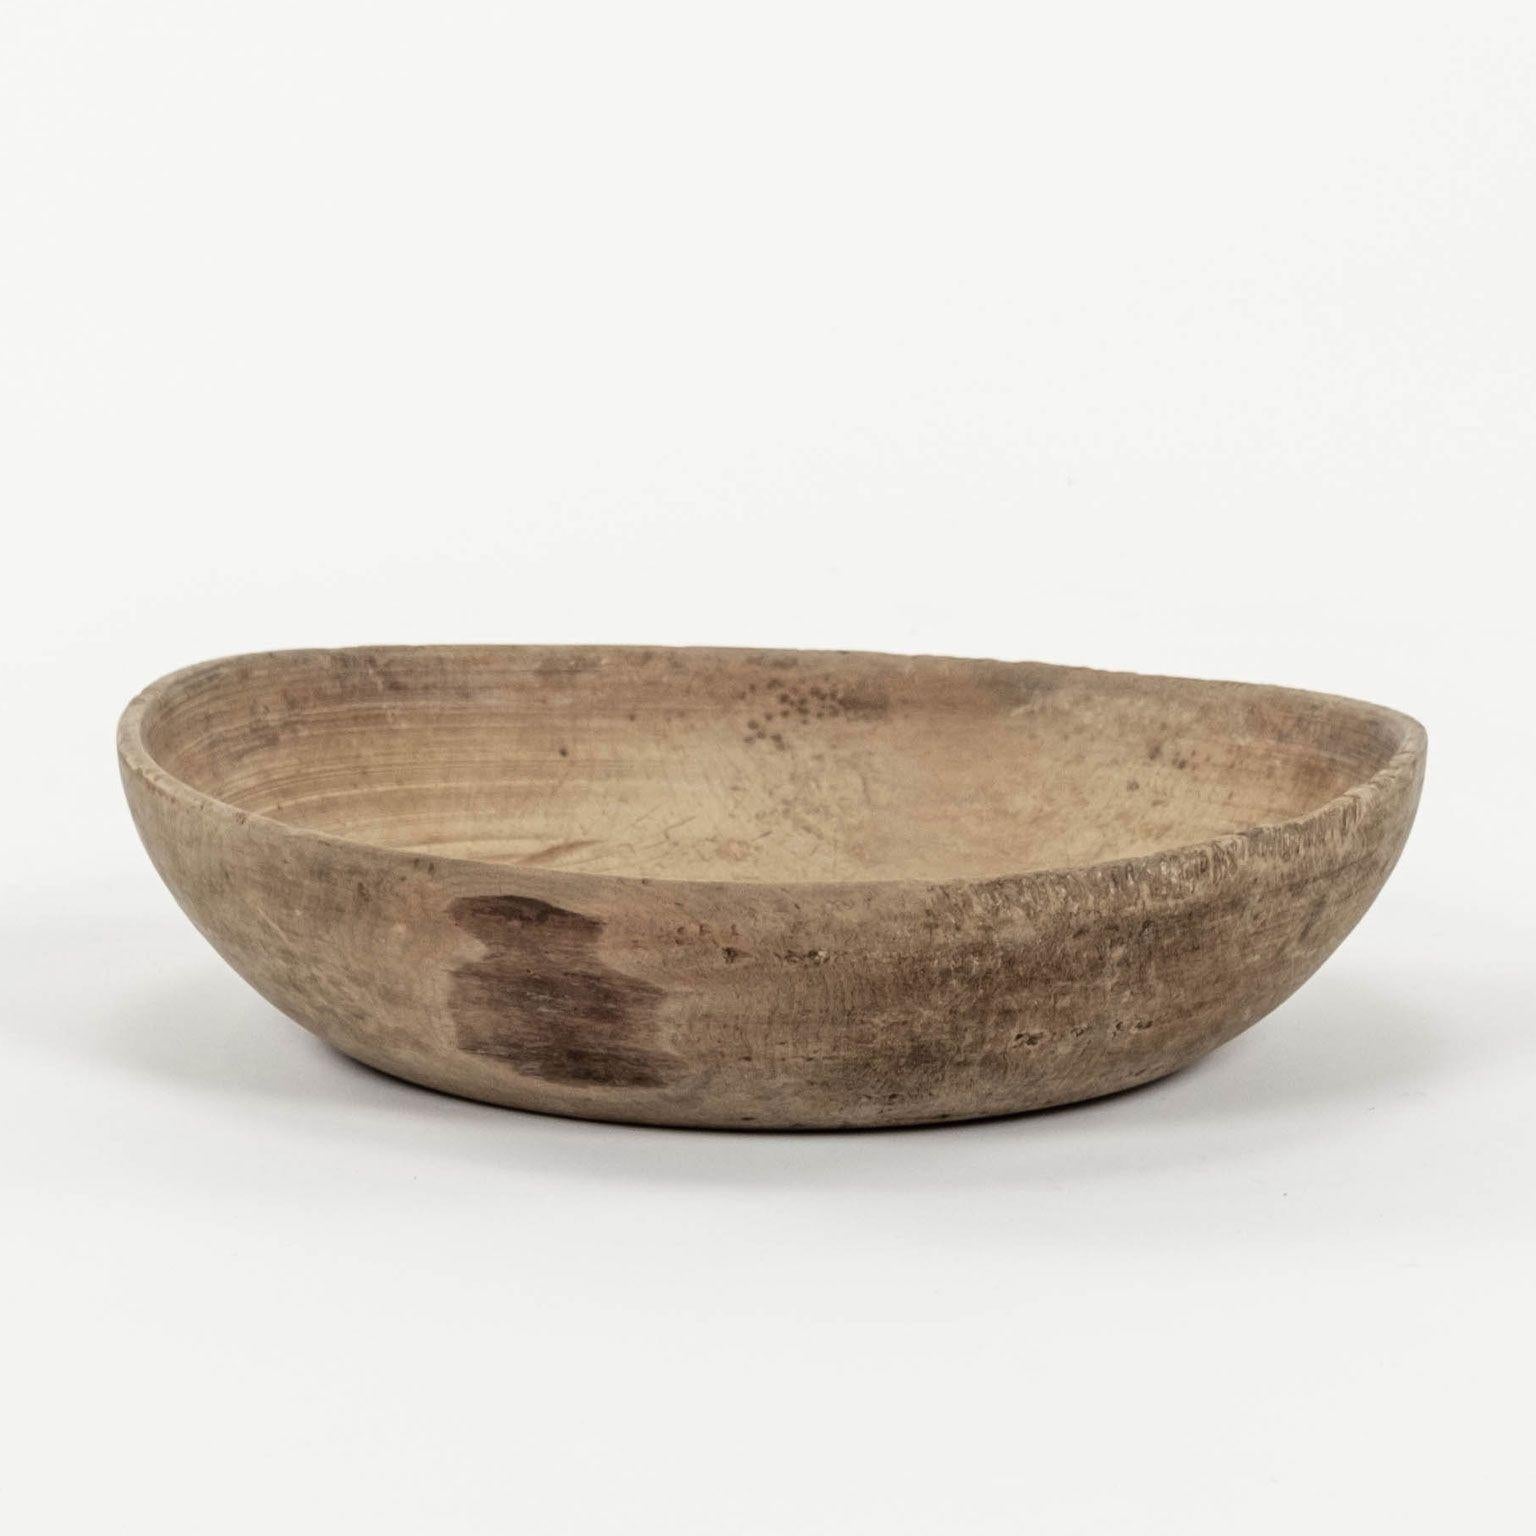 Rustic Swedish turned wooden bowl dating to the mid-to-late 19th century. Excellent dry mid-brown patina and decorative incised line marks from the turning process.

Note: Due to regional changes in humidity and climate during shipping, antique wood